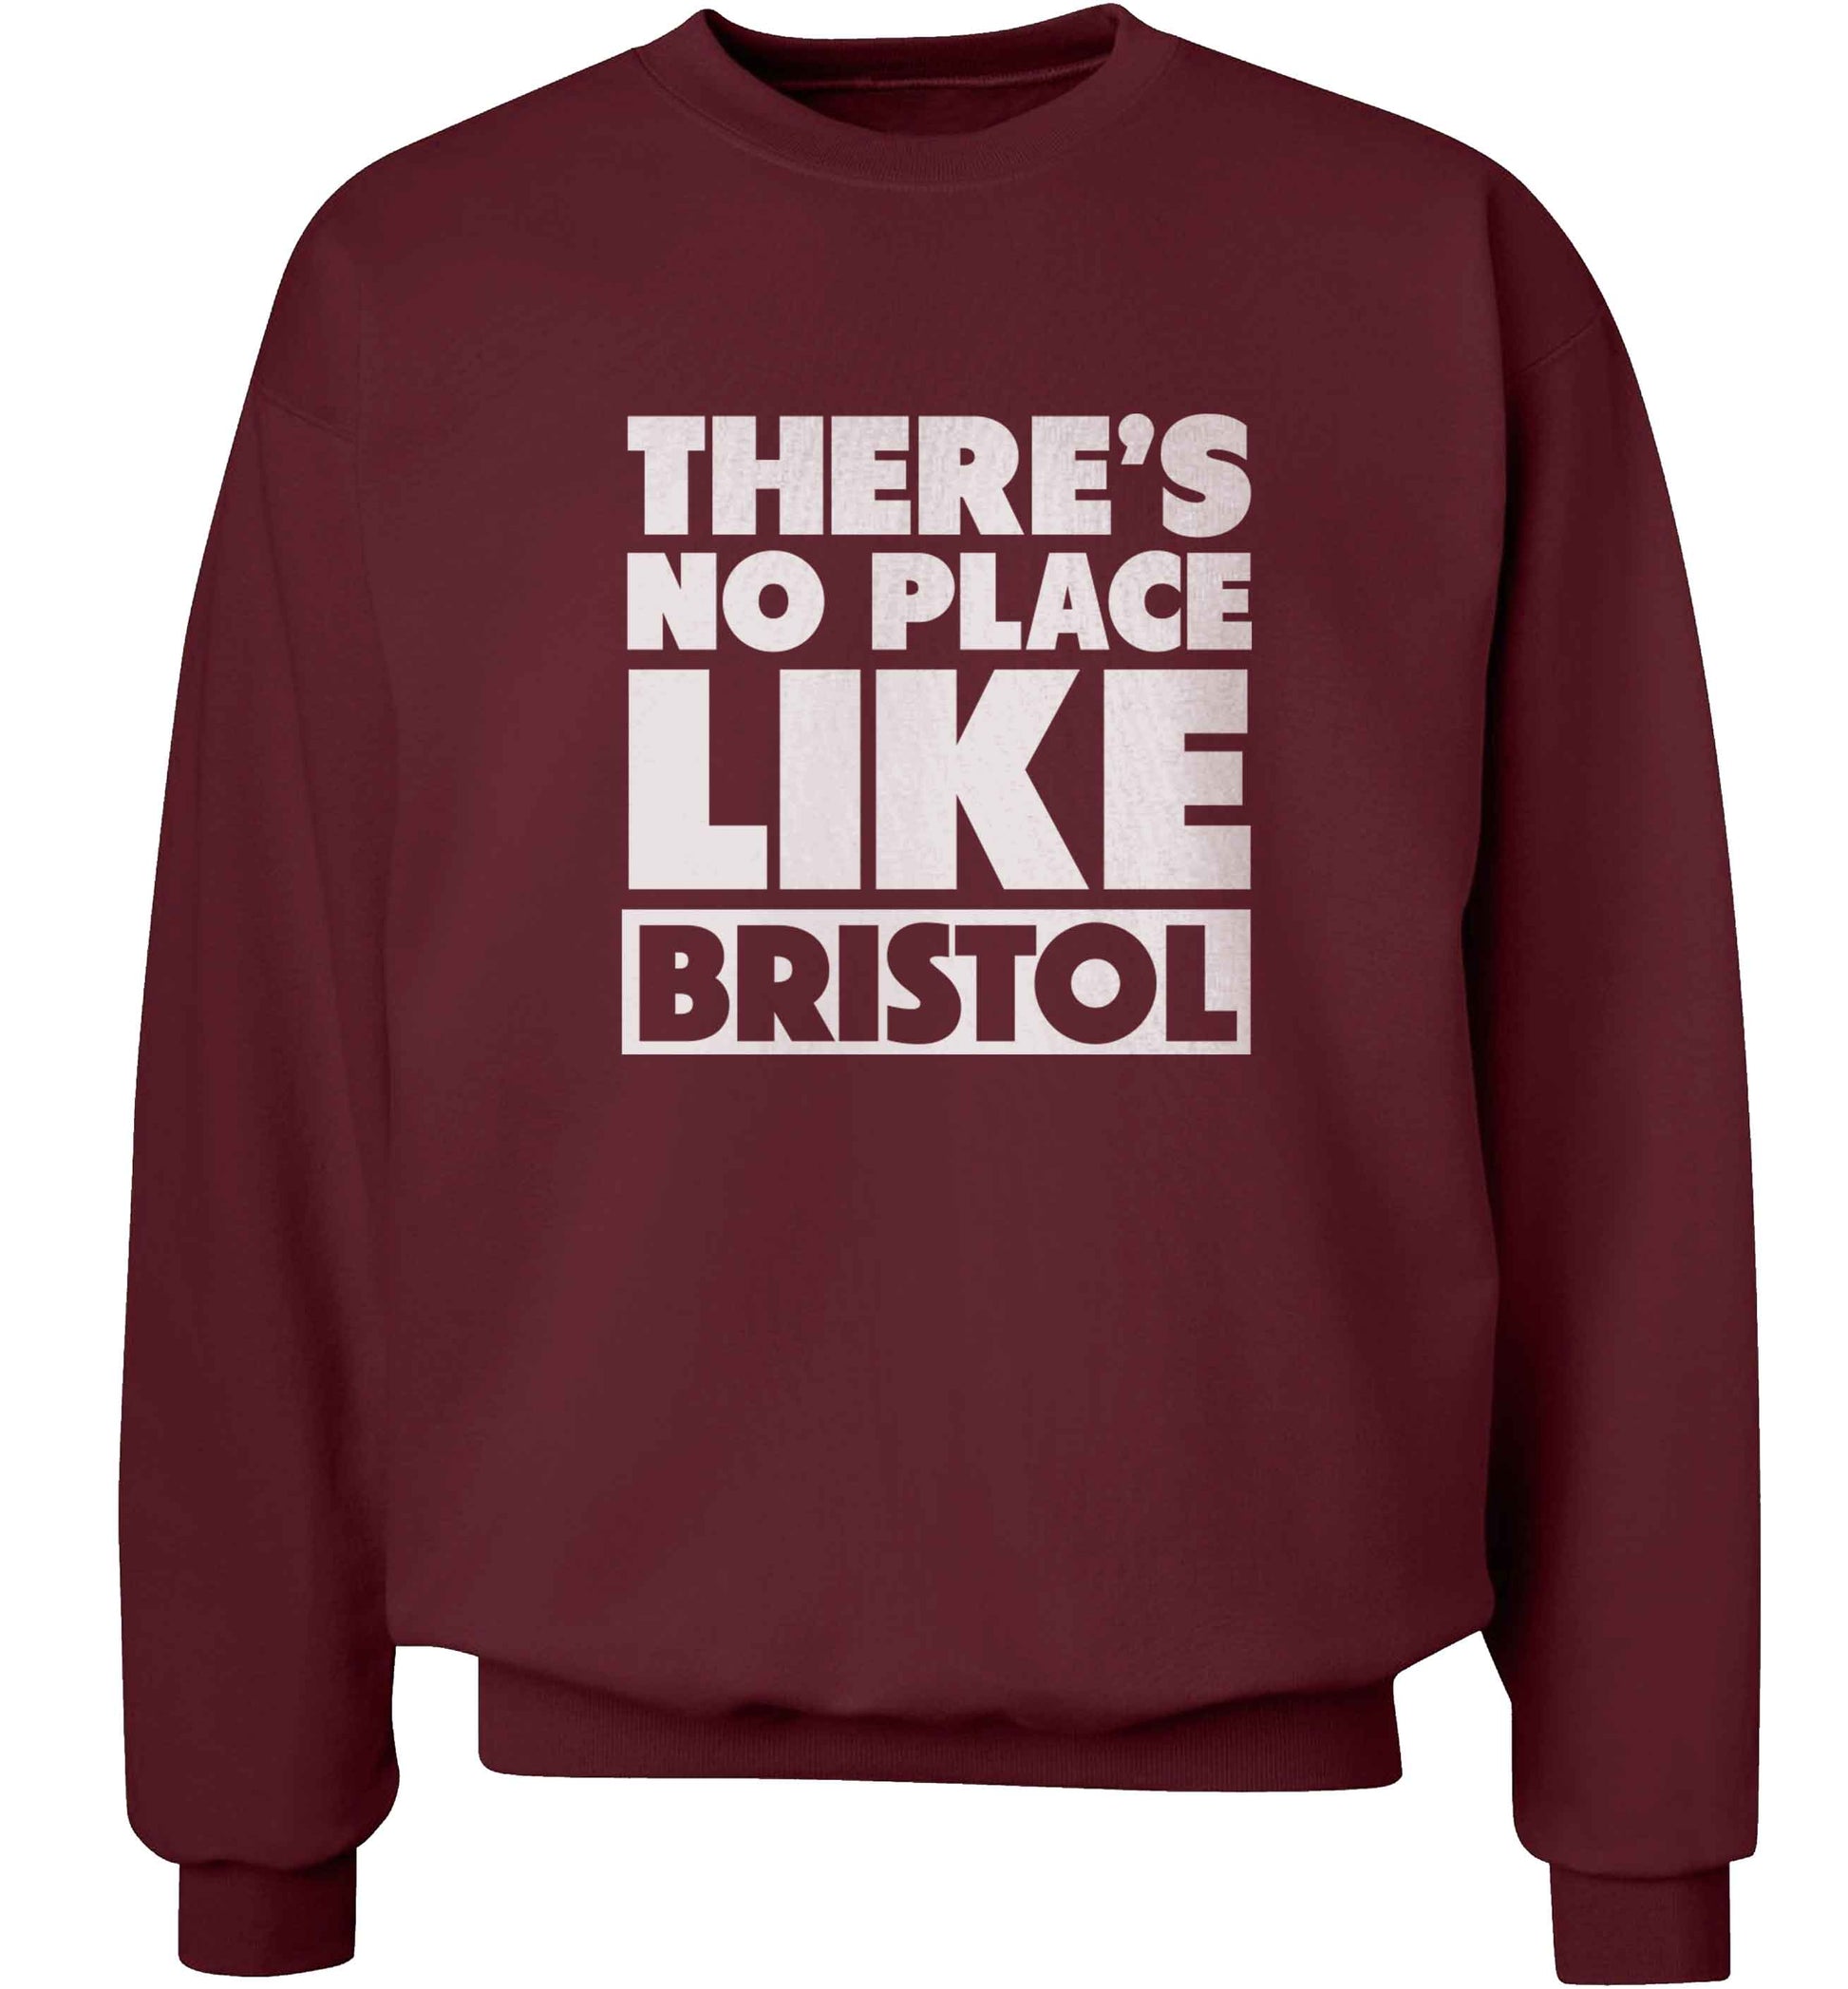 There's no place like Bristol adult's unisex maroon sweater 2XL